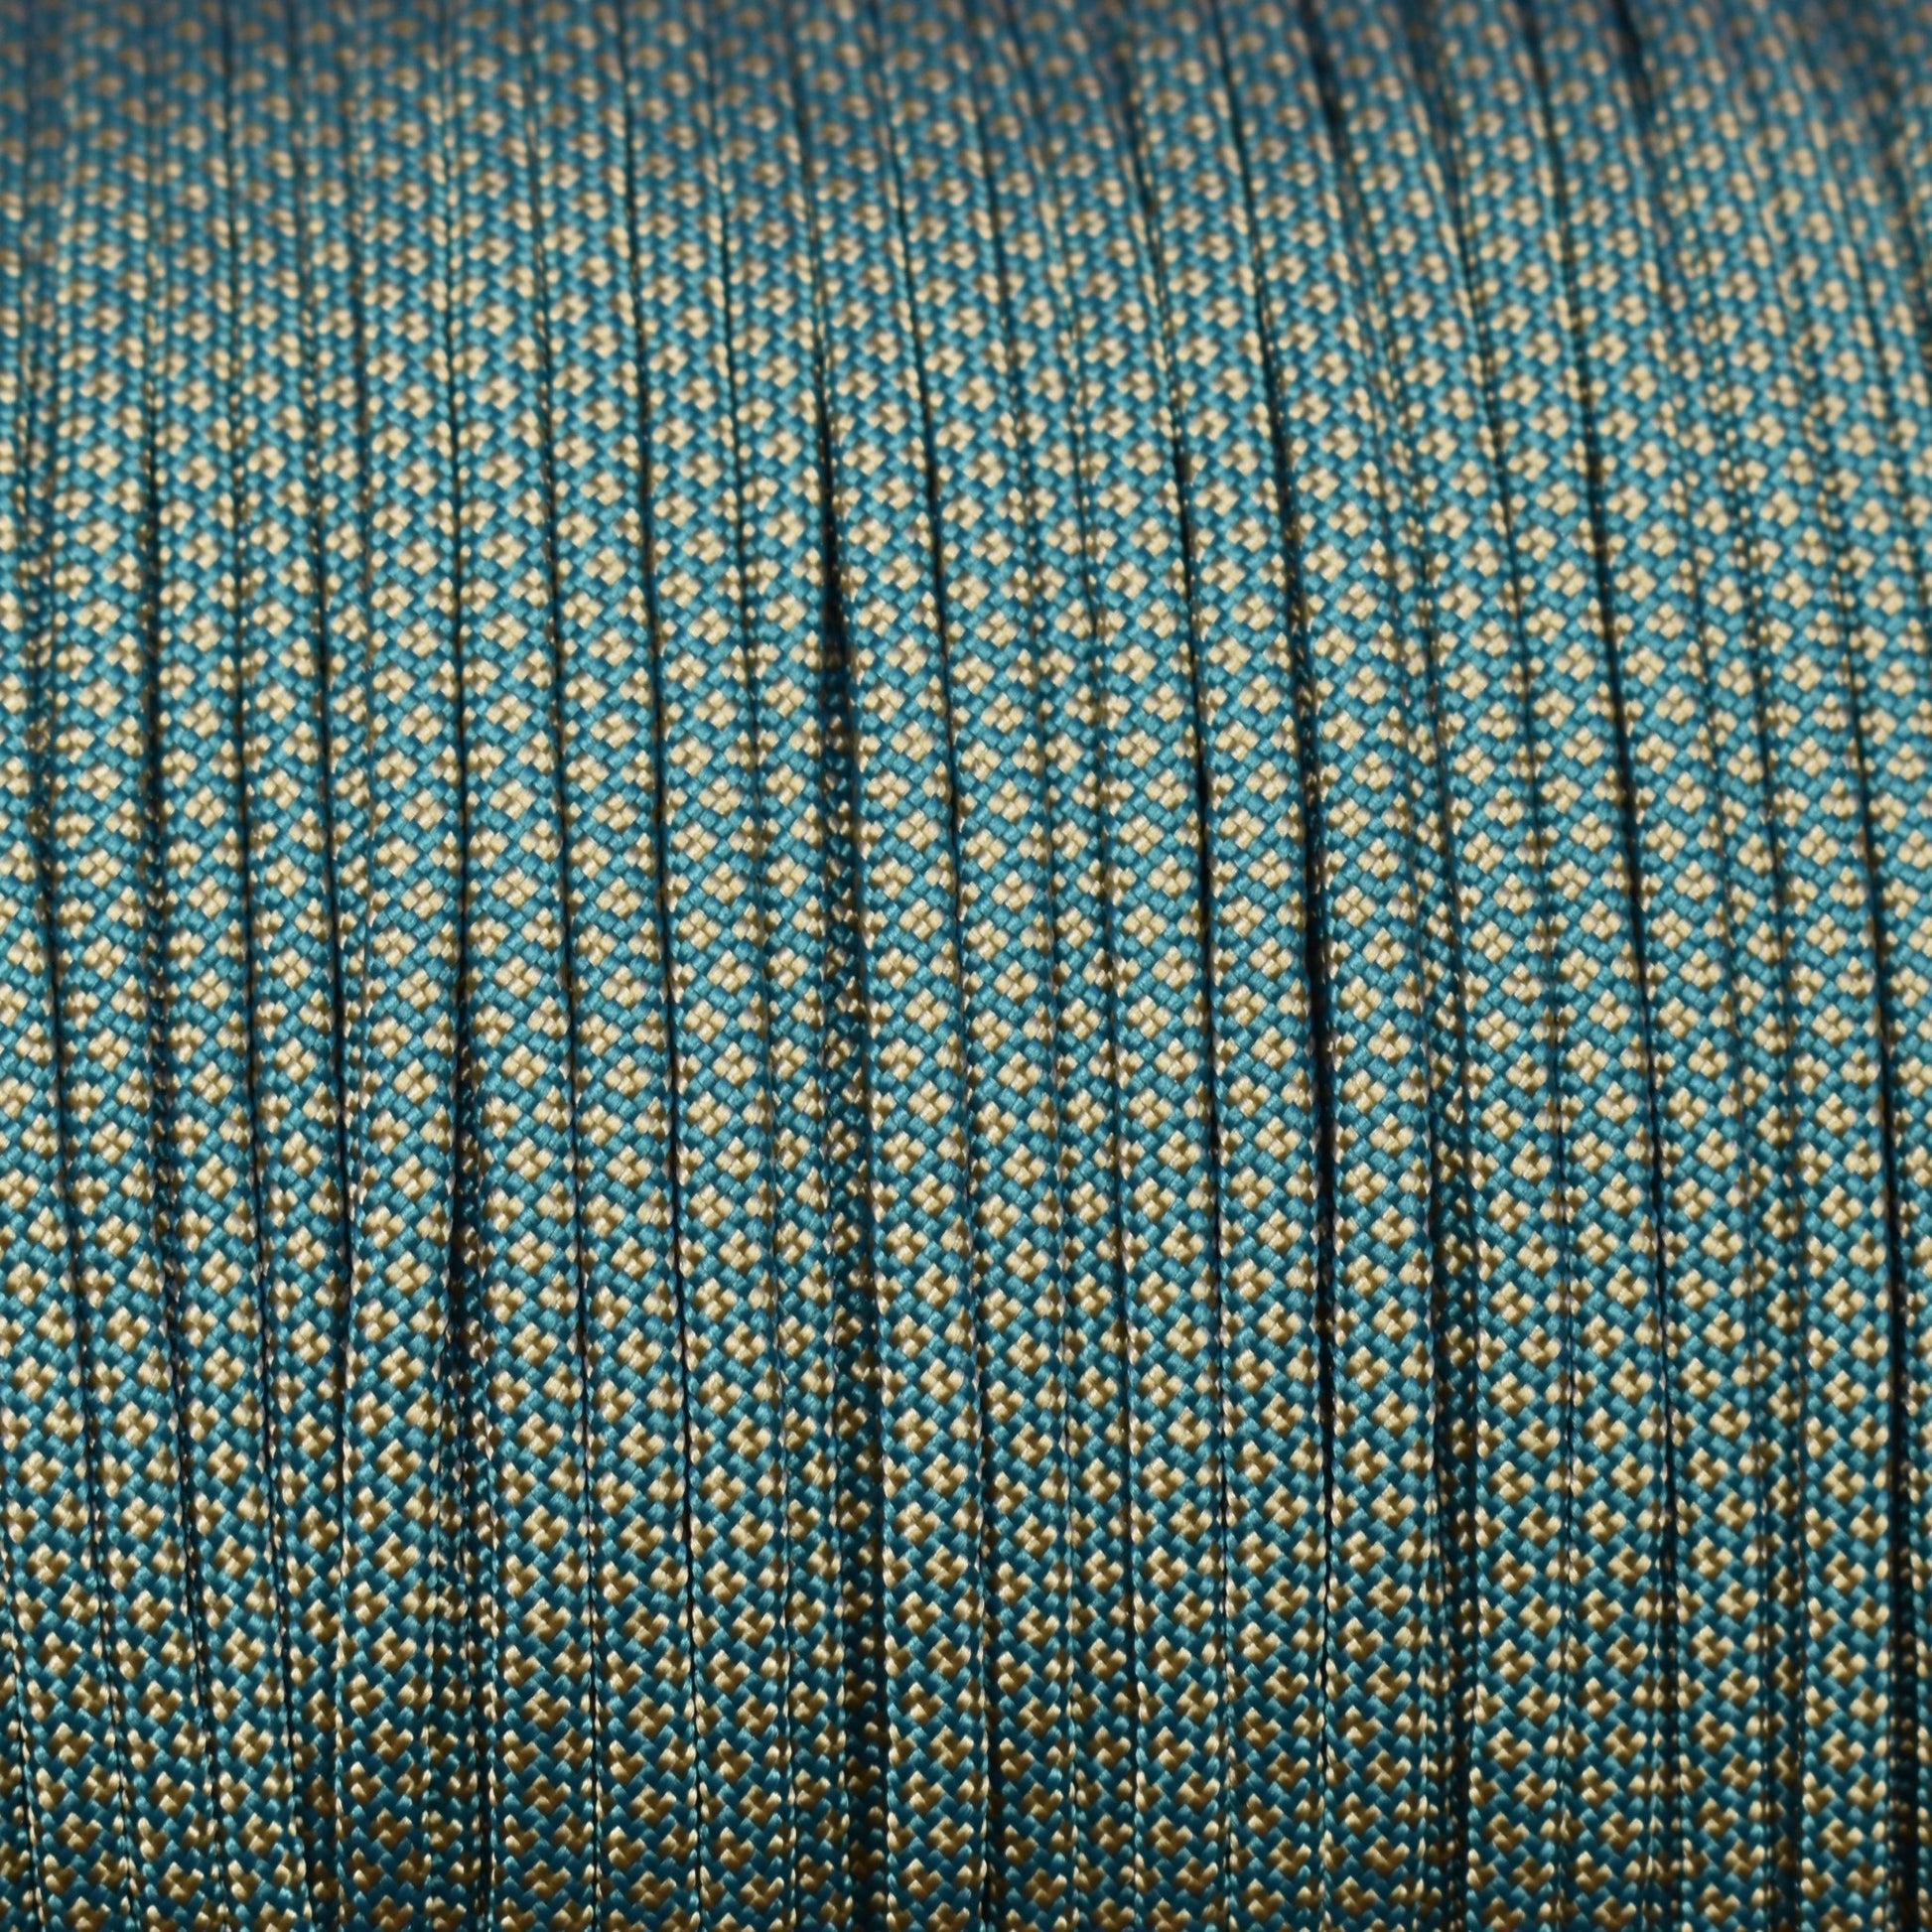 550 Paracord Teal with Gold Diamonds Made in the USA Nylon/Nylon (1000 FT.) - Paracord Galaxy